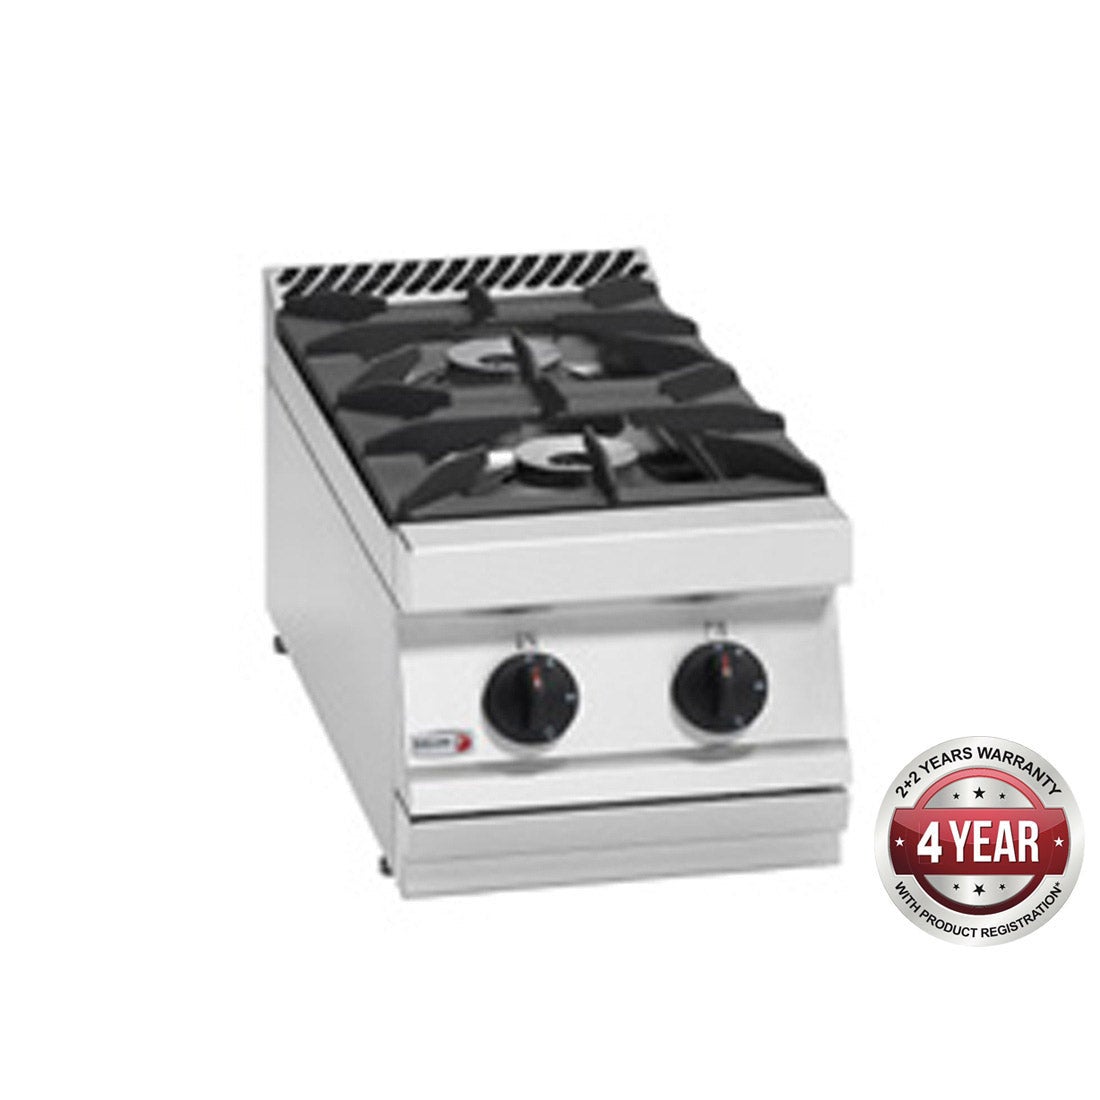 Fagor 700 Series Natural Gas 2 Burner Boiling Top With Cast CG7-20H Cooktops & Hobs